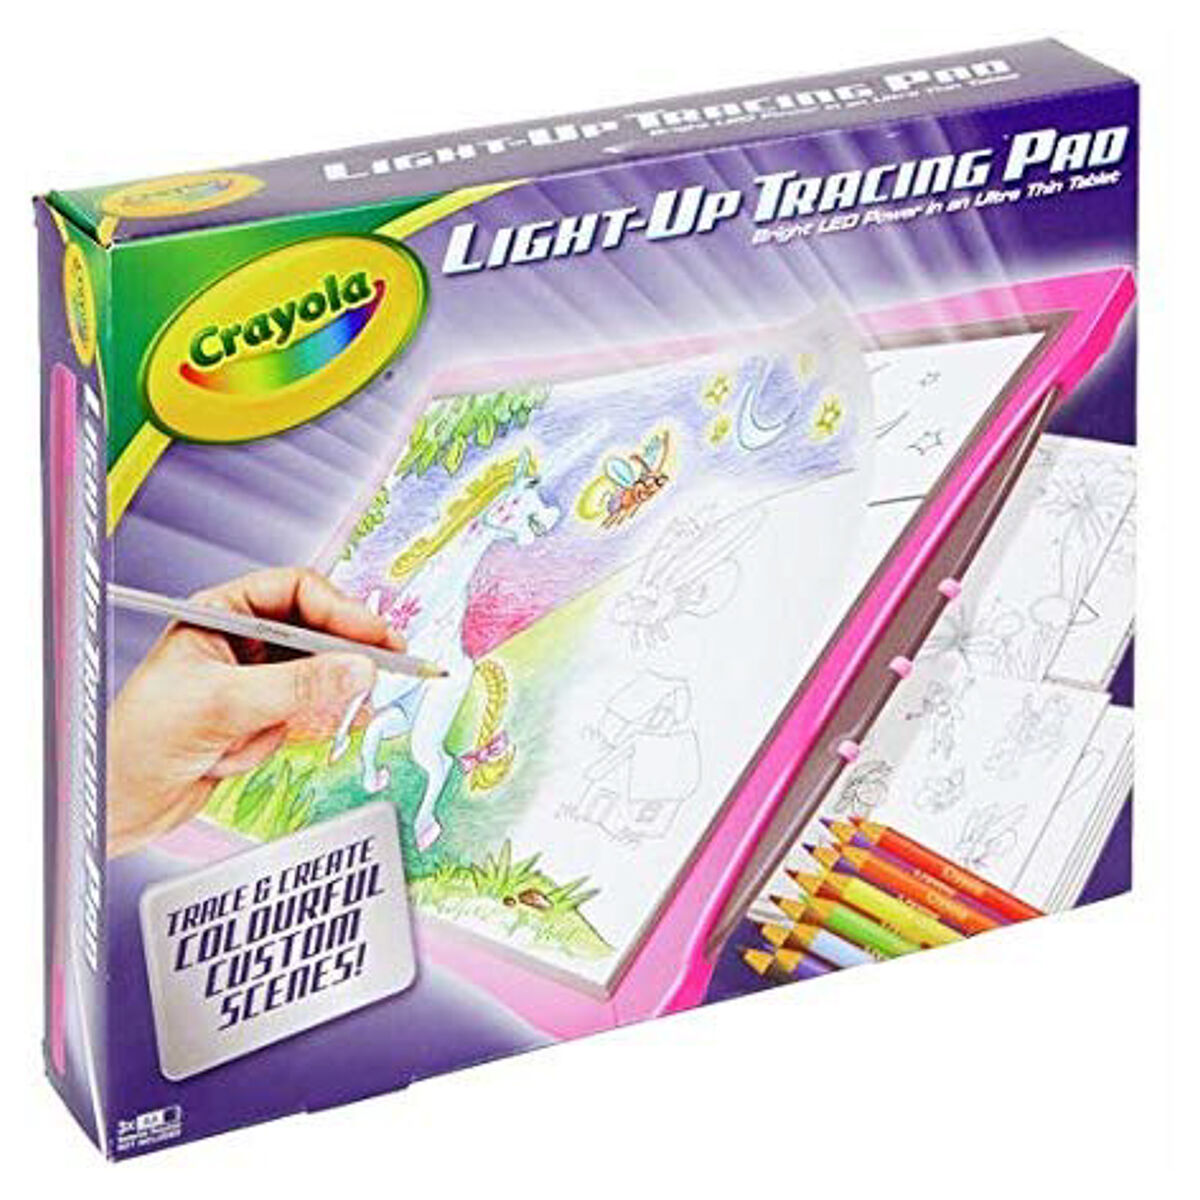 led-light-up-tracing-pad-drawing-colouring-trace-and-create-with-templates-ebay